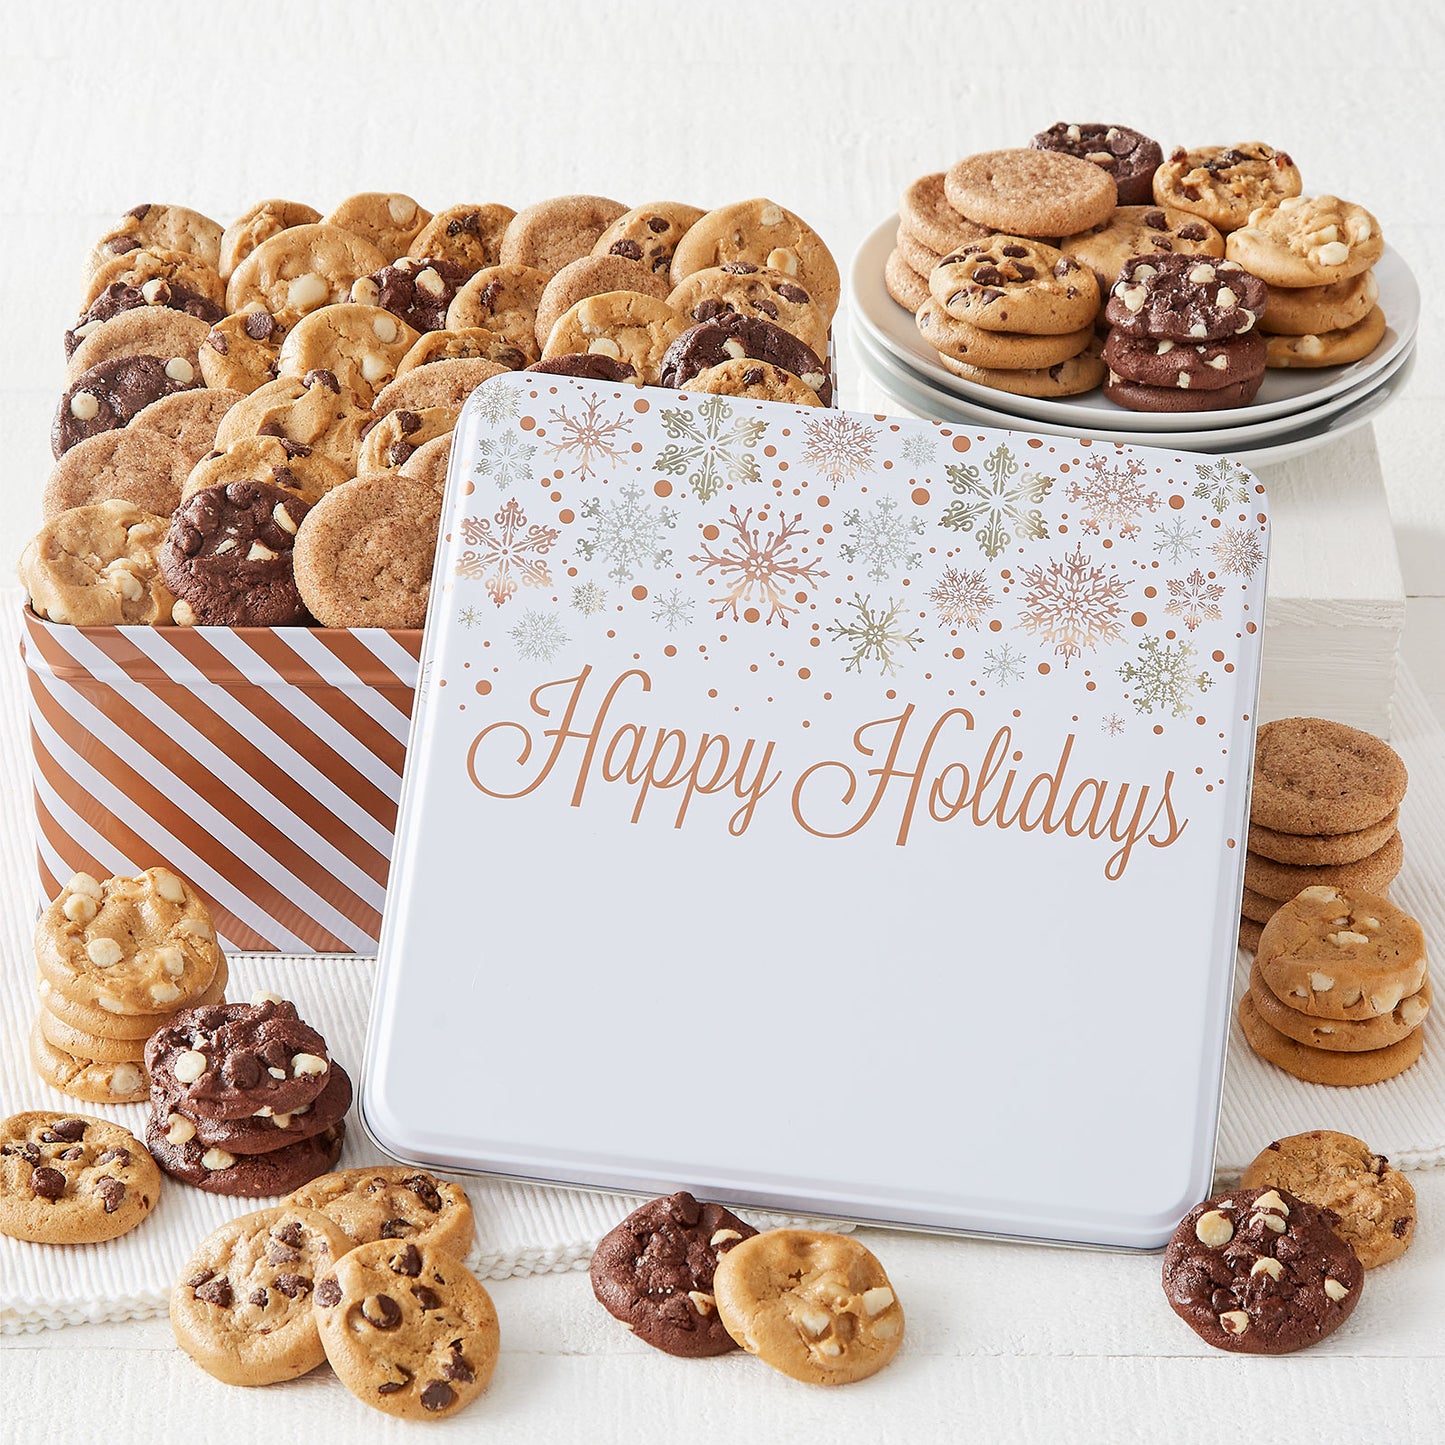 A Happy Holidays gift tin decorated with silver and gold snowflakes on a white top and filled with an assortment of Nibblers®.